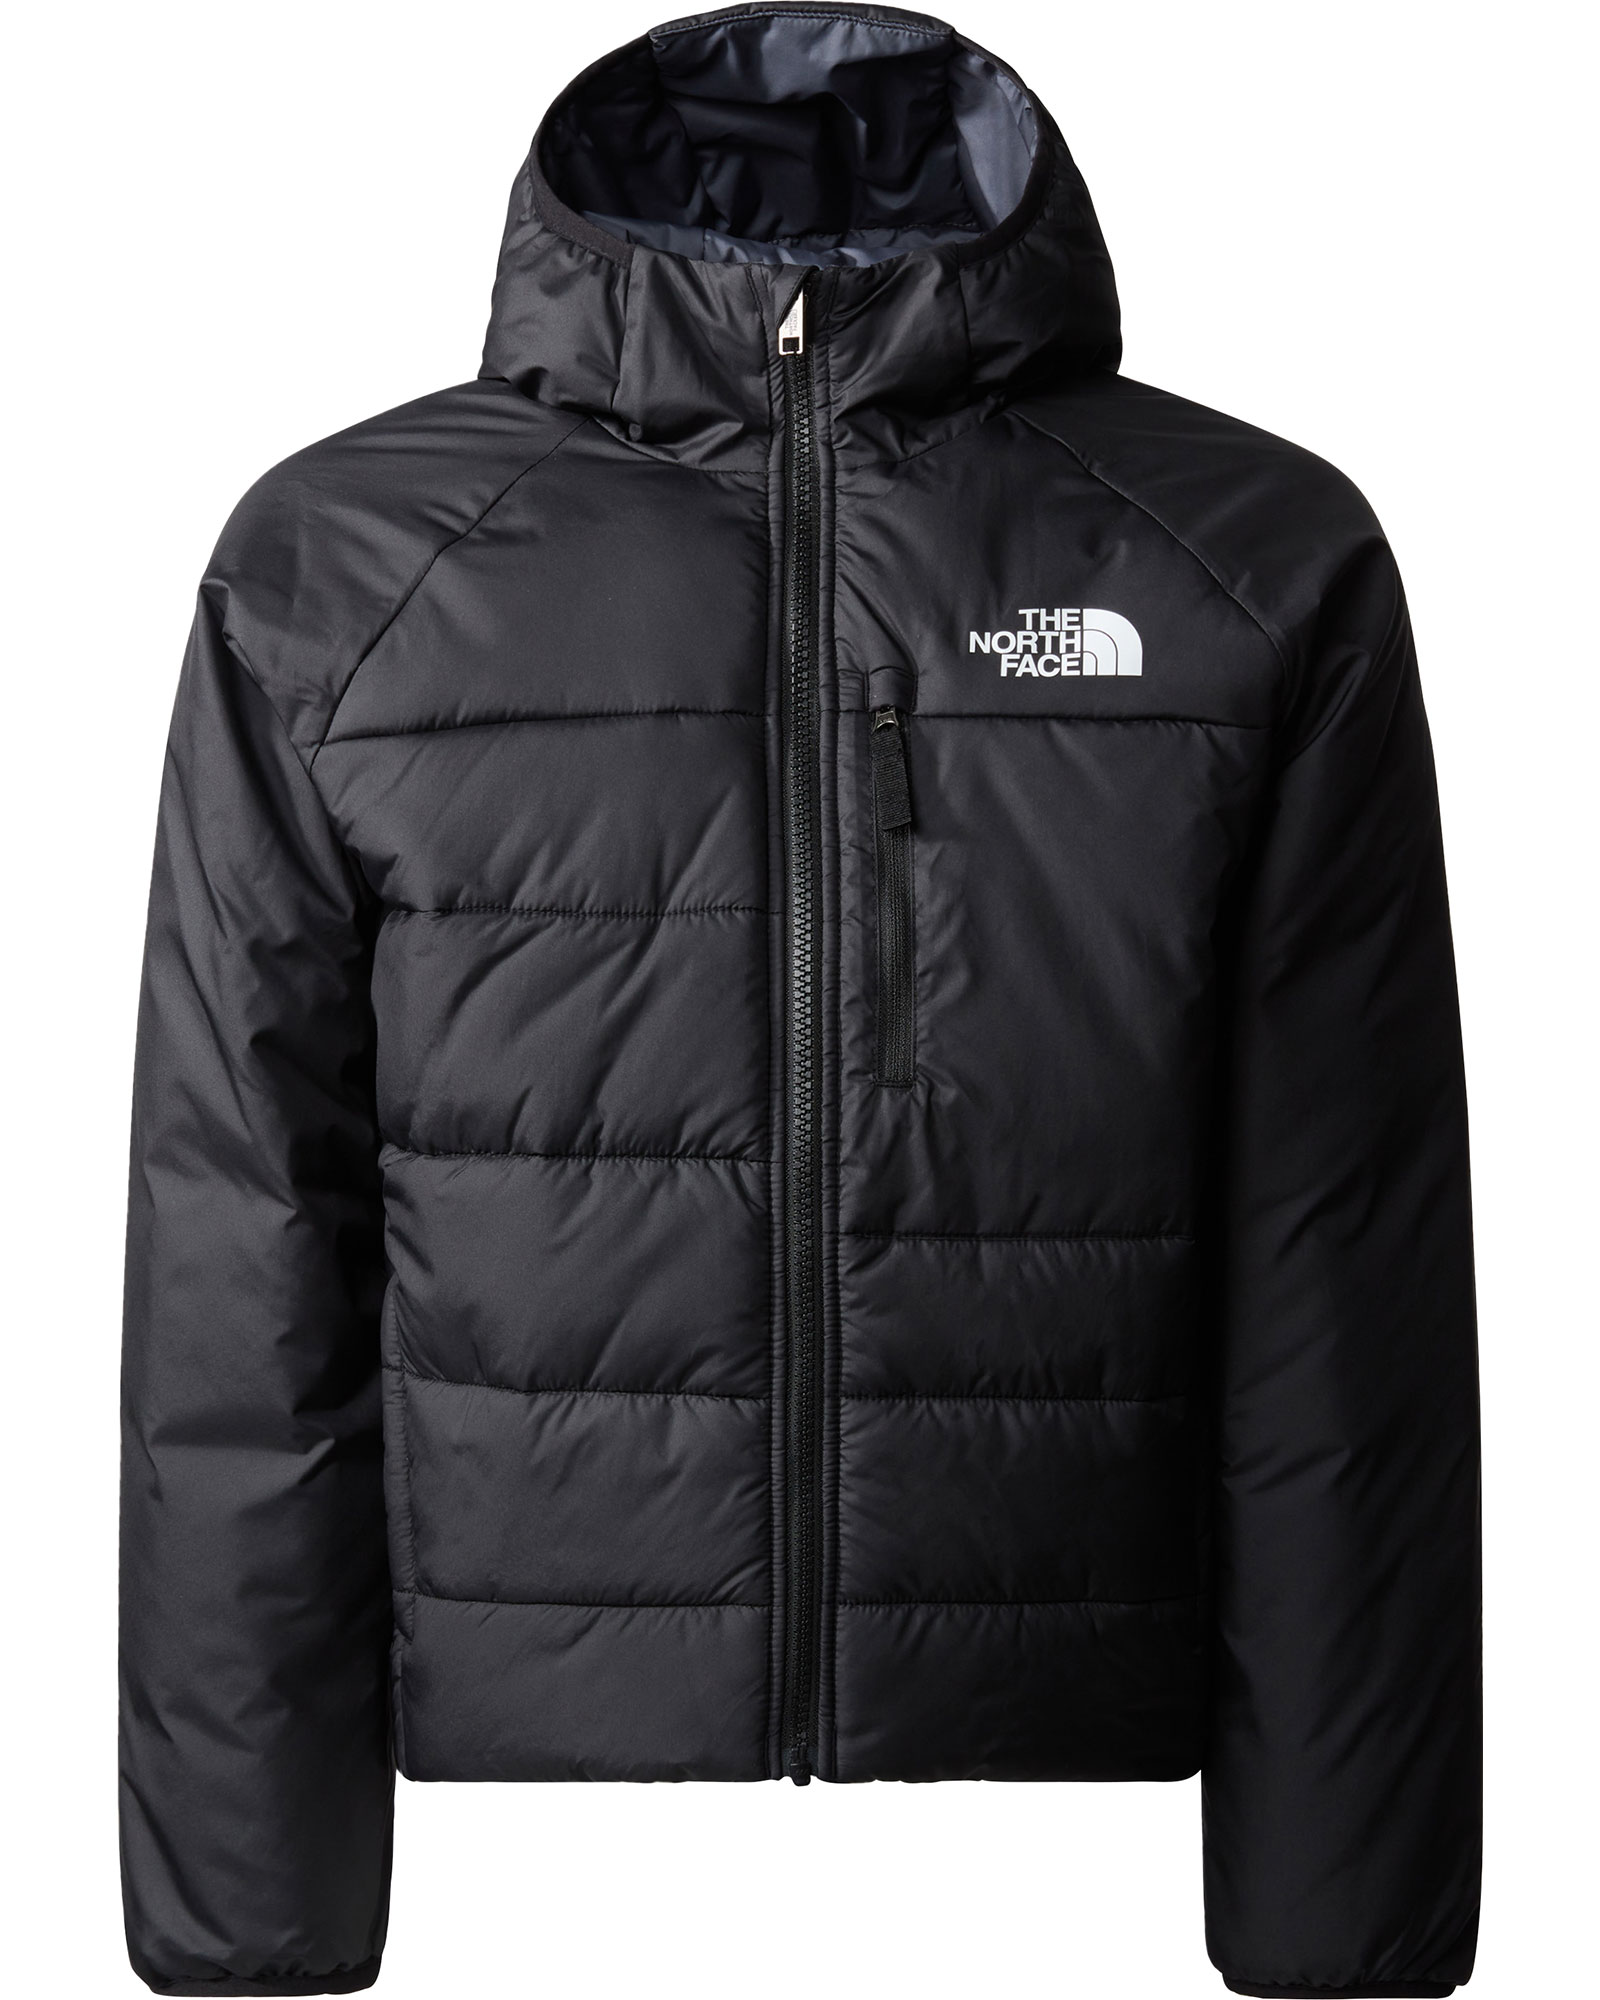 The North Face Boy’s Reversible Perrito Insulated Jacket - TNF Black L